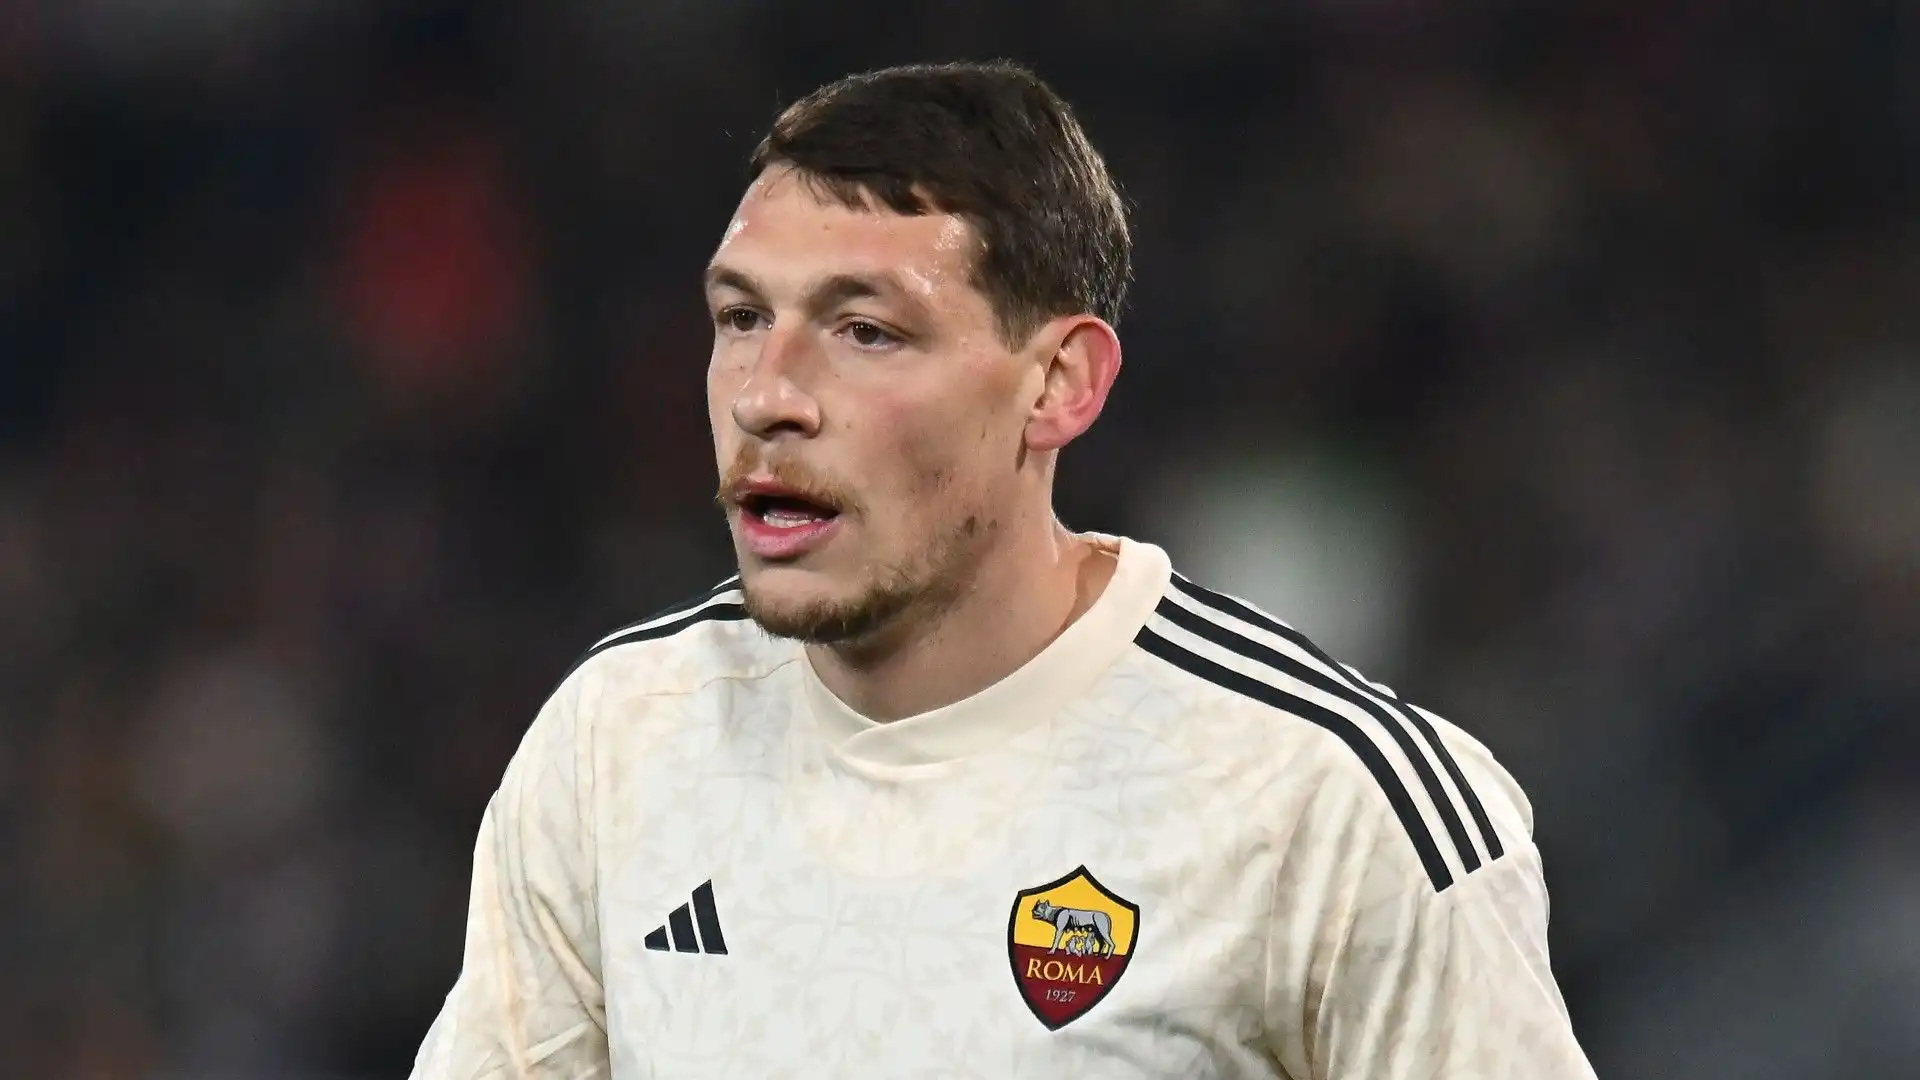 Fiorentina, Andrea Belotti says goodbye to Roma, and Vincenzo Italiano has a clear opinion about him